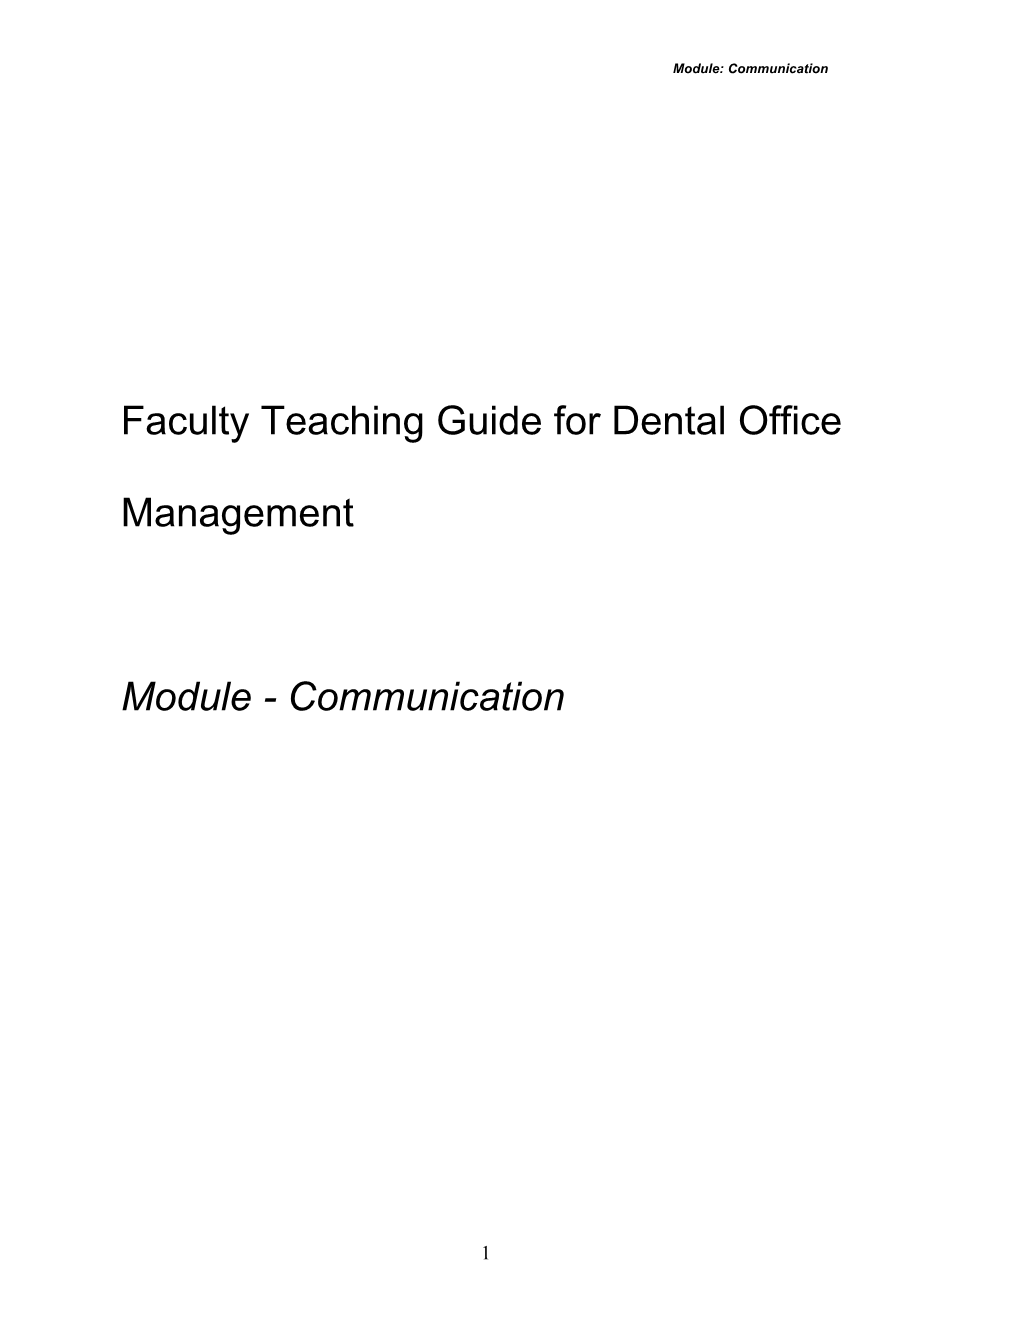 Faculty Teaching Guide for Health Information Management